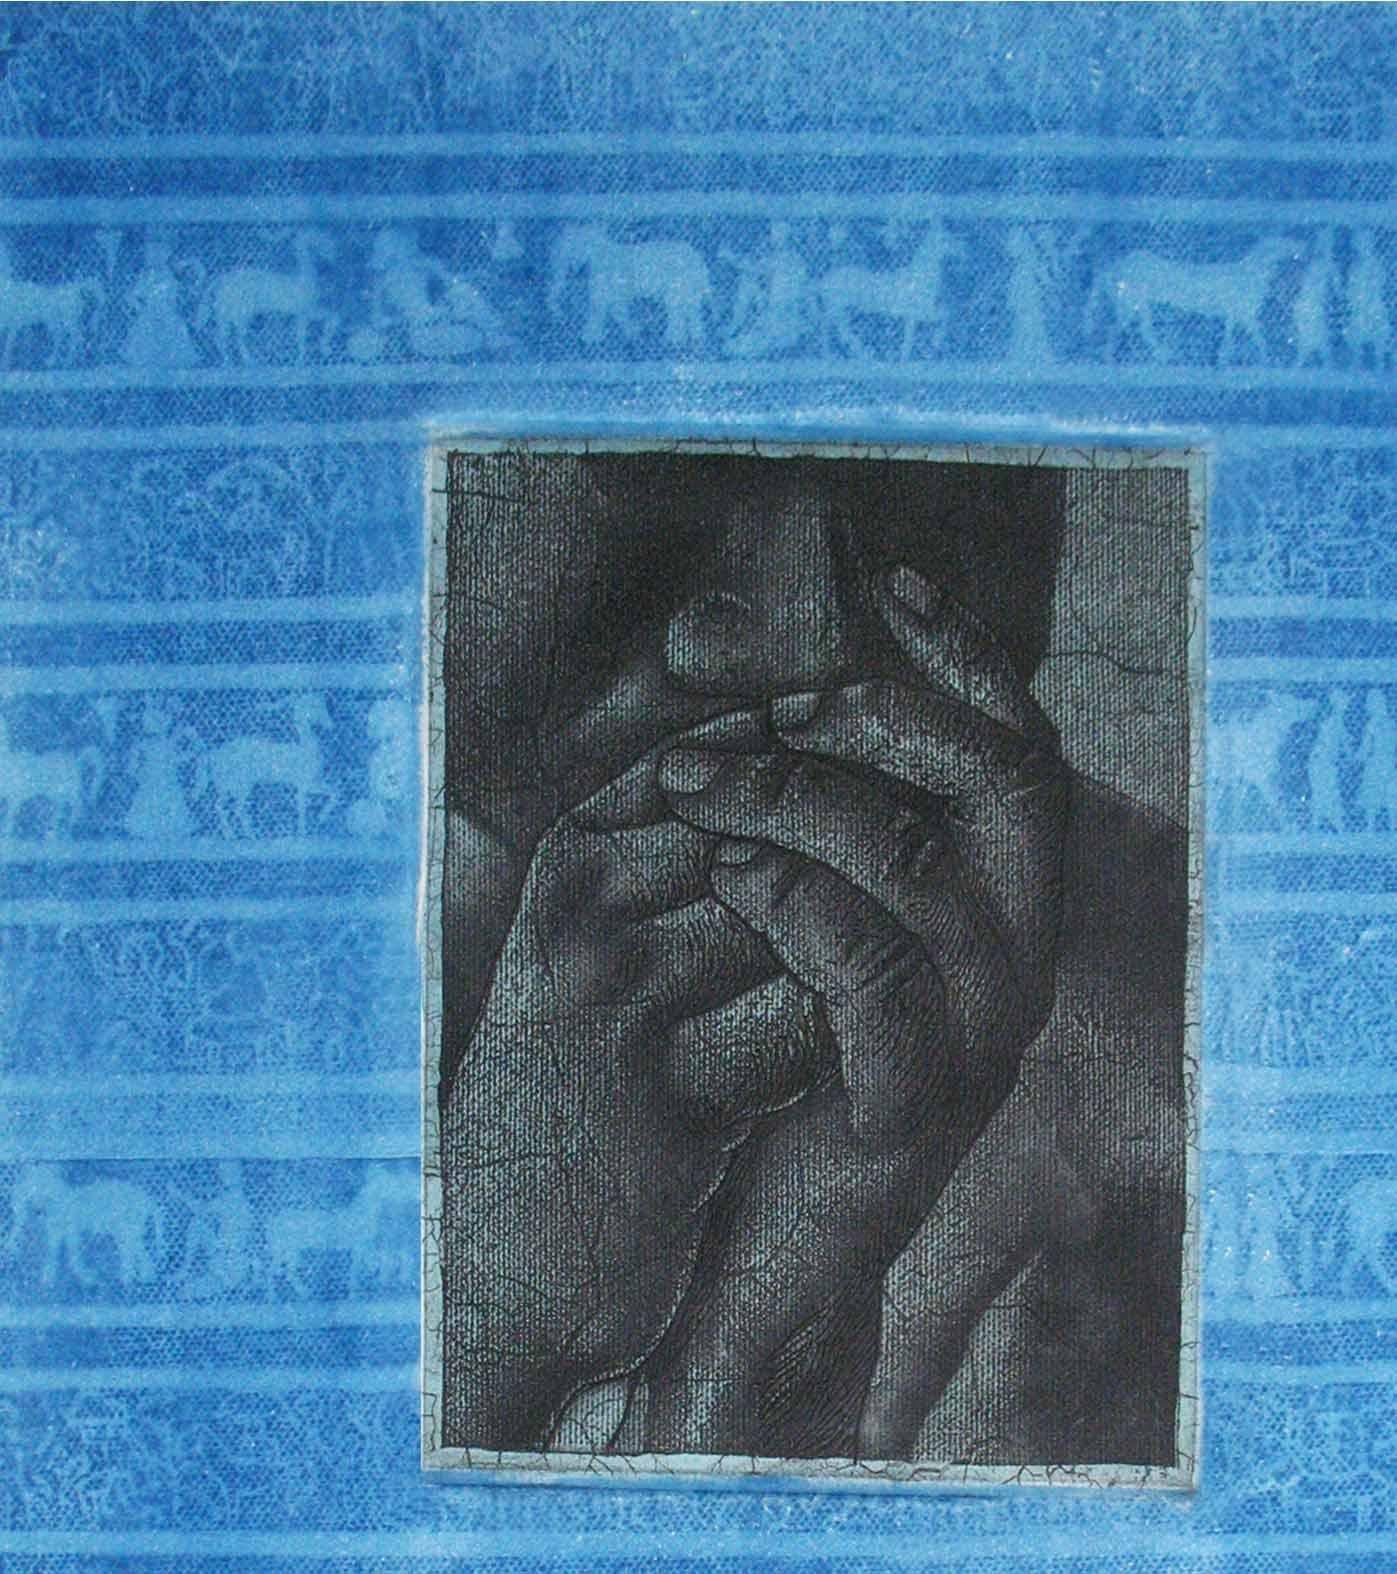 Kamal Mitra - Thinker - 16 x 12 inches (unframed size)
Etching & Cyanotype on paper
Inclusive of shipment in a roll form.

About Kamal Mitra’s Works :
While pursuing his Bachelors (Painting) at the  Govt. College of Art & Craft, Mitra simultaneously